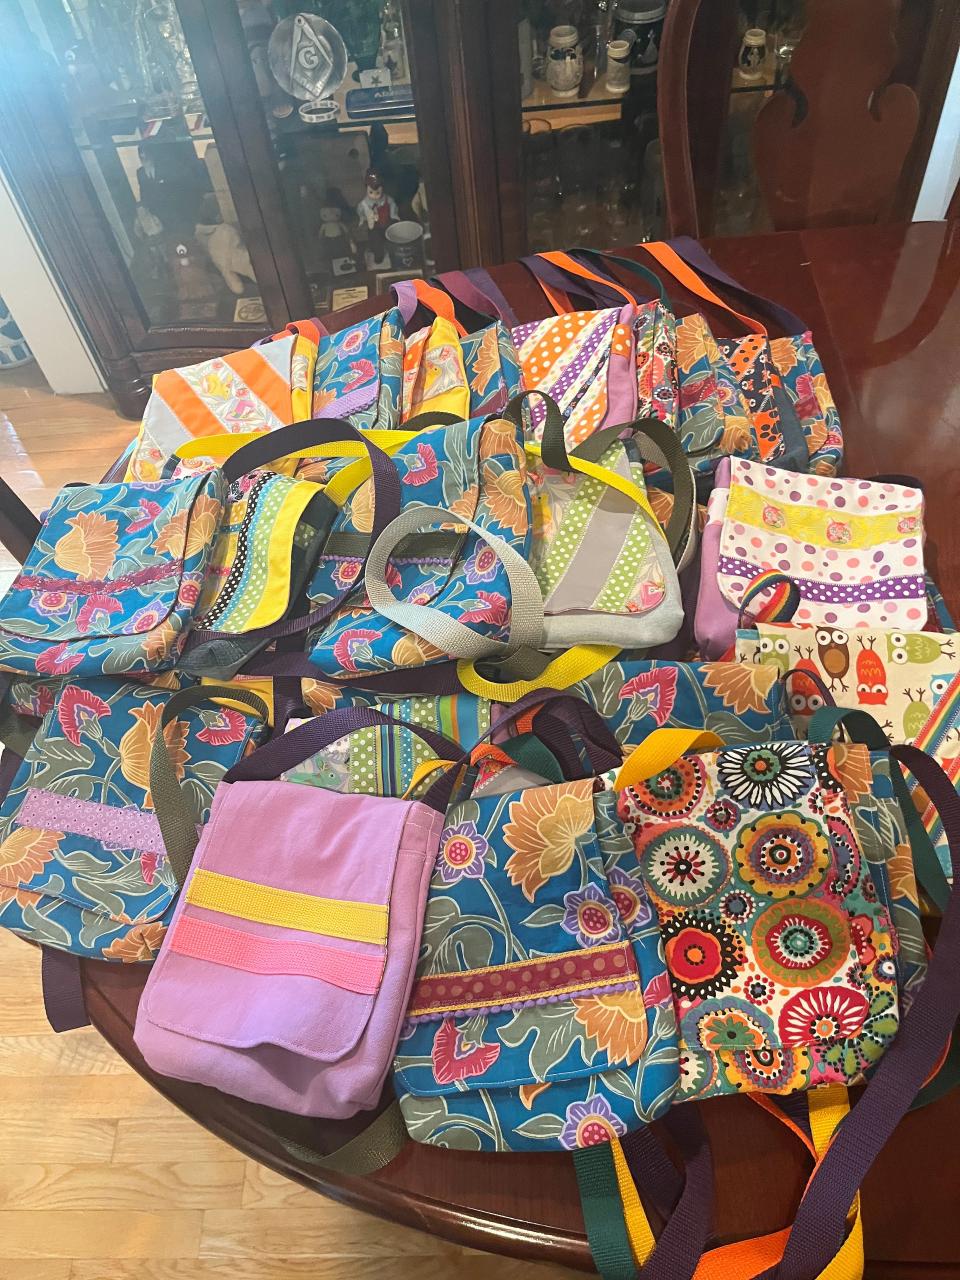 These purses were made for girls and young women in Africa by the Shelby County volunteer group purSEWverance as part of Sew Powerful's annual "Sew-a-Thon" fundraiser.